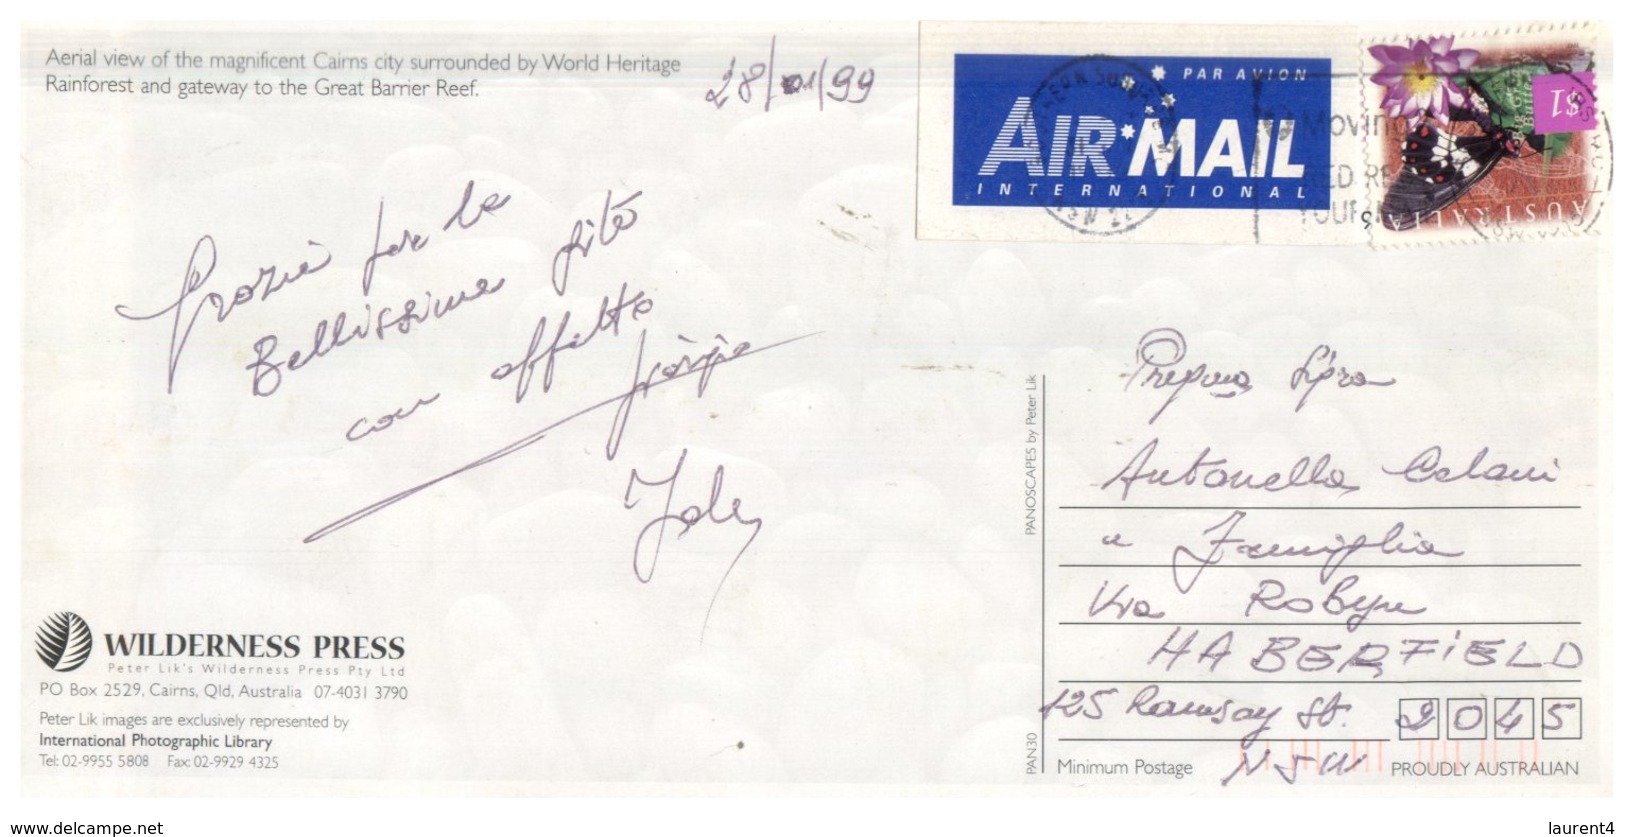 (616) Australia - QLD - Cairns (with Stamp At Back Of Card) - Cairns